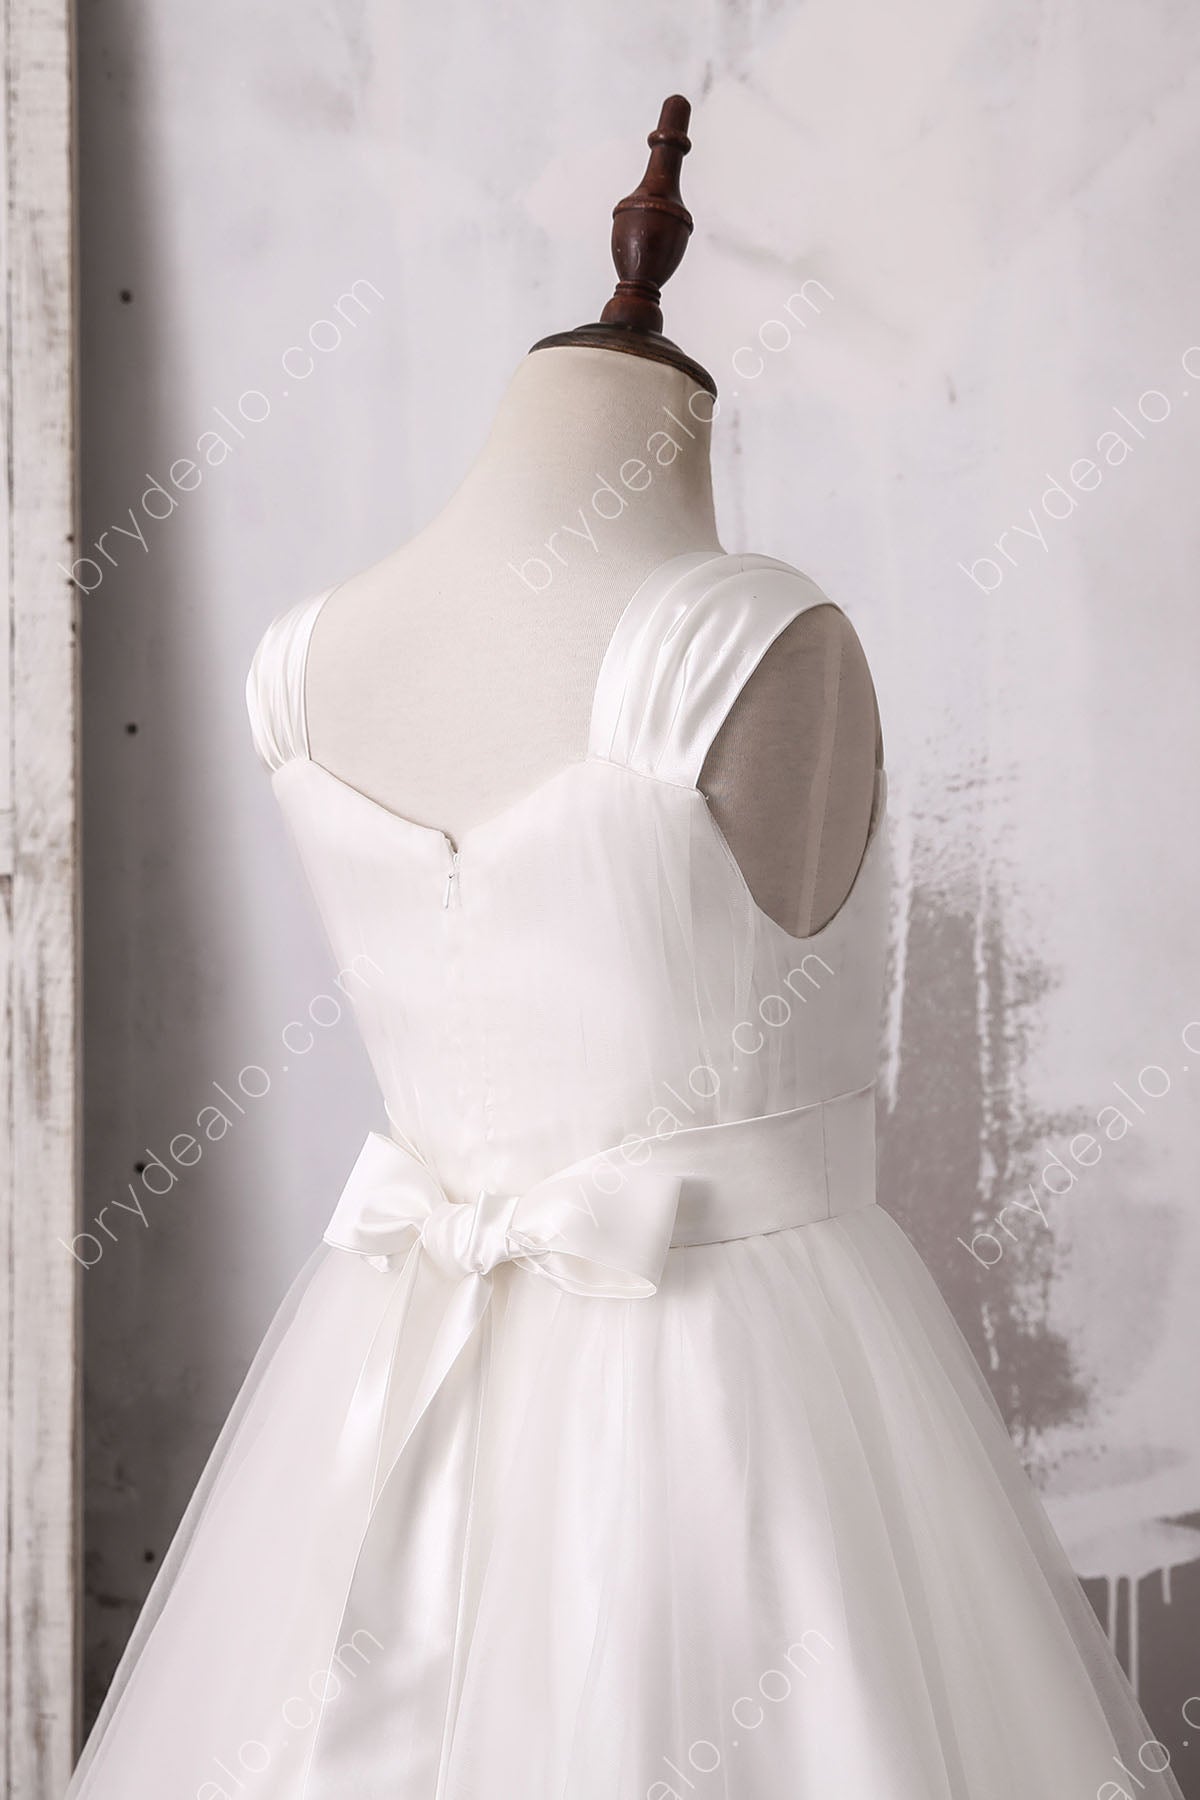 private label Shoulder Straps Sleeveless Flower Girl Ball Gown